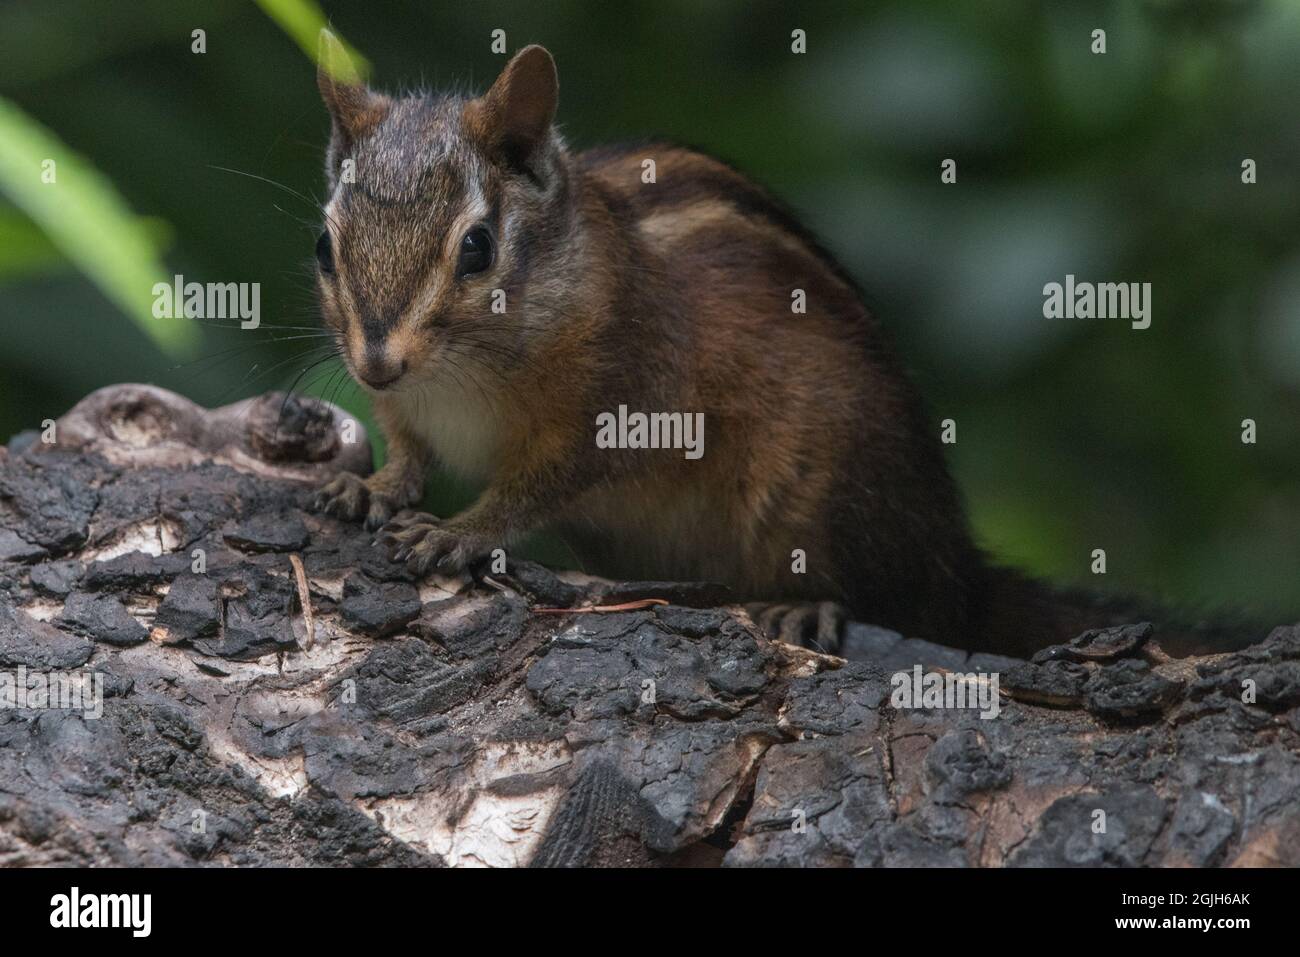 Sonoma chipmunk (Neotamias sonomae) a species of rodent endemic to California, this one was seen in Point Reyes National seashore in Marin county. Stock Photo